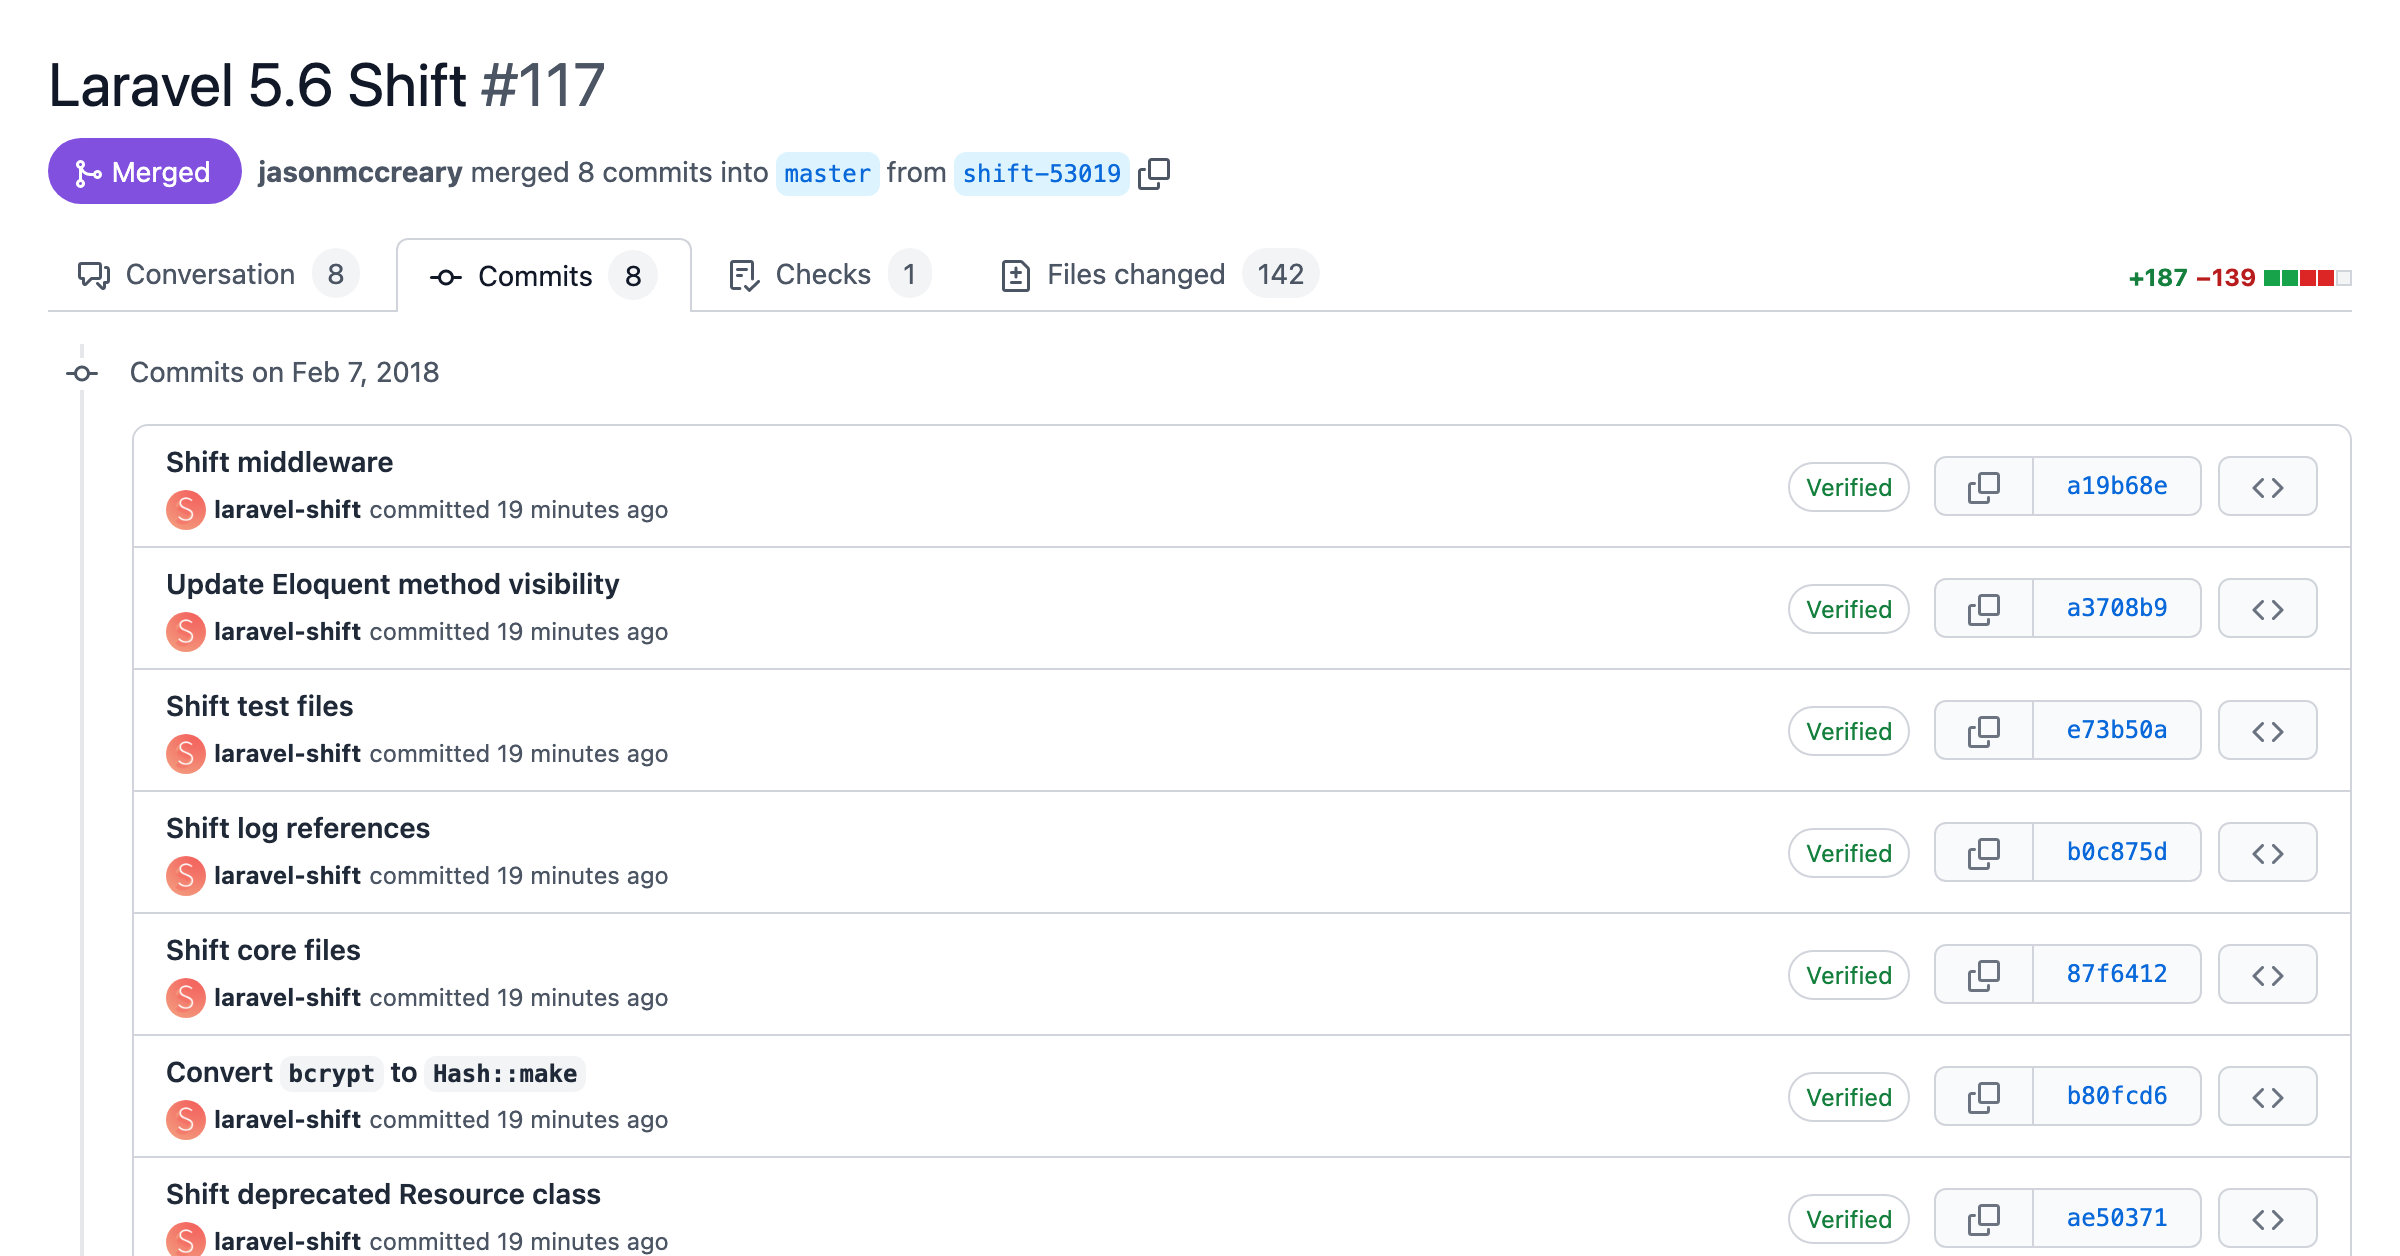 Screenshot of a pull request with atomic commits for each change of the Laravel 5.6 Shift